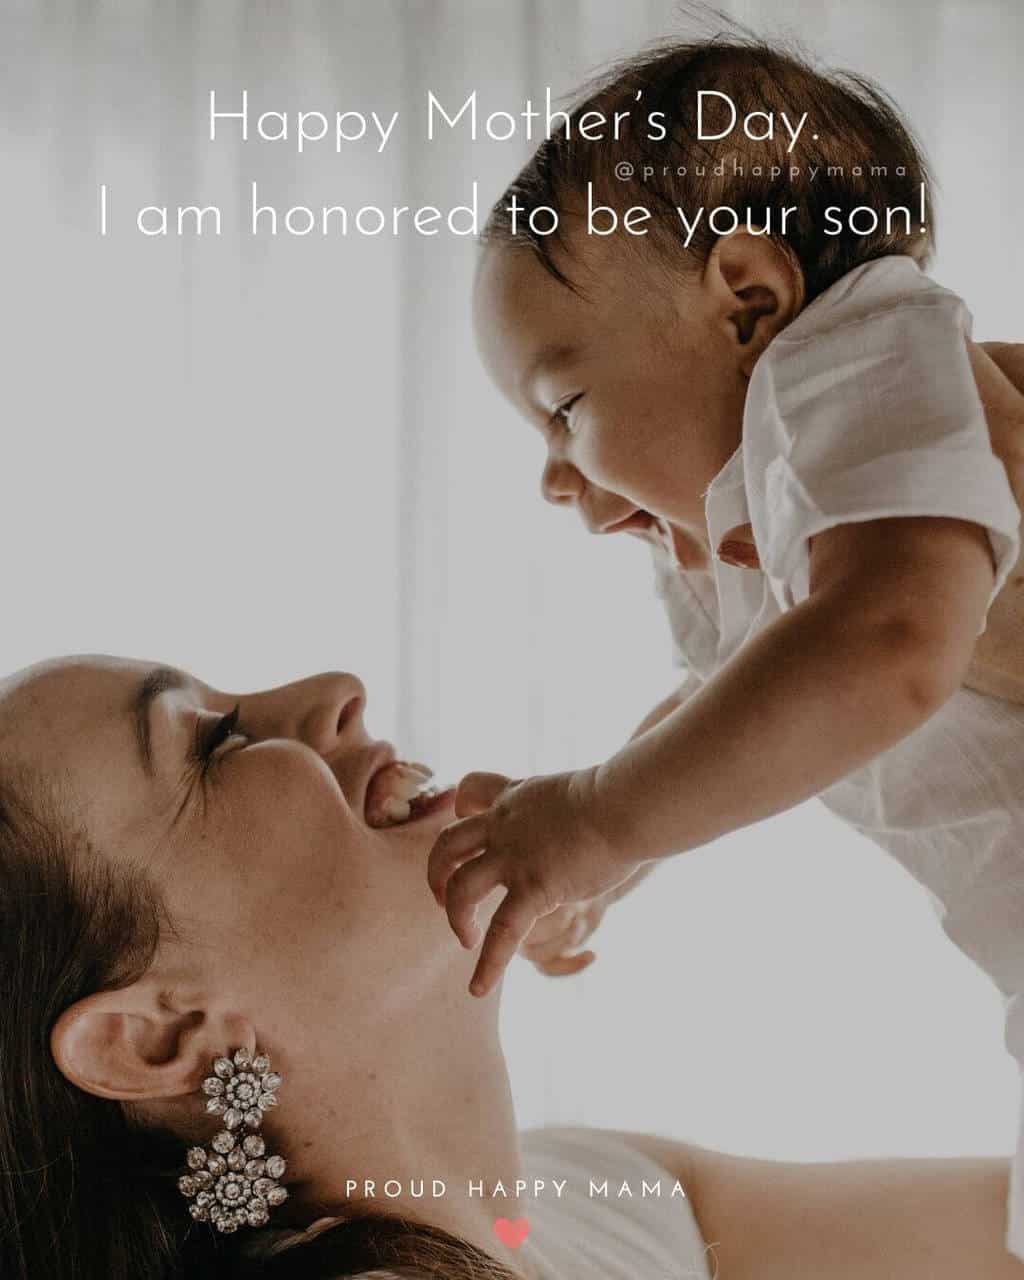 Happy Mothers Day Quotes Images | Happy Mother’s Day. I am honored to be your son!